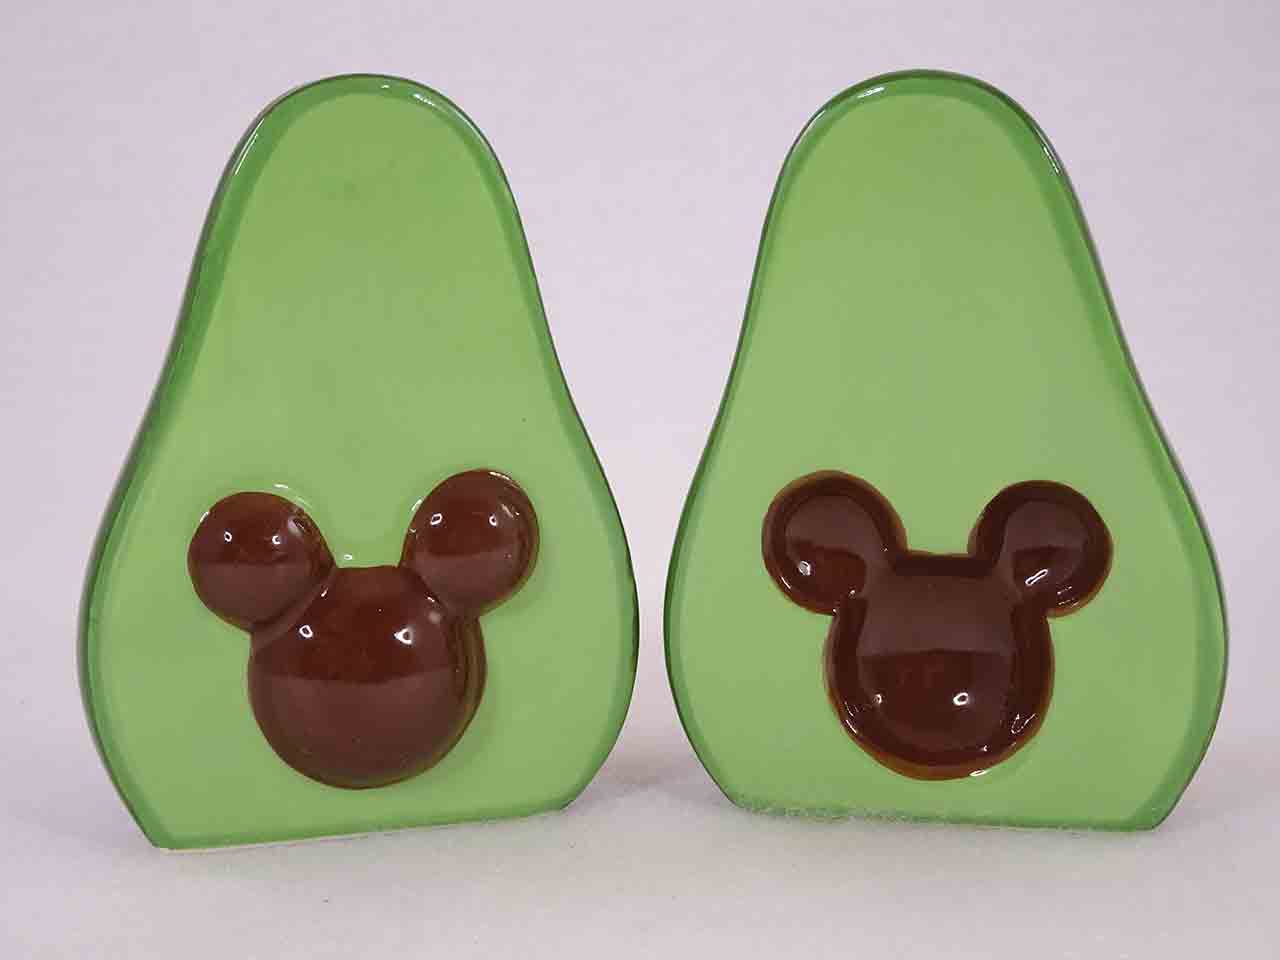 Disney Mickey Mouse avocado shaped salt and pepper shakers